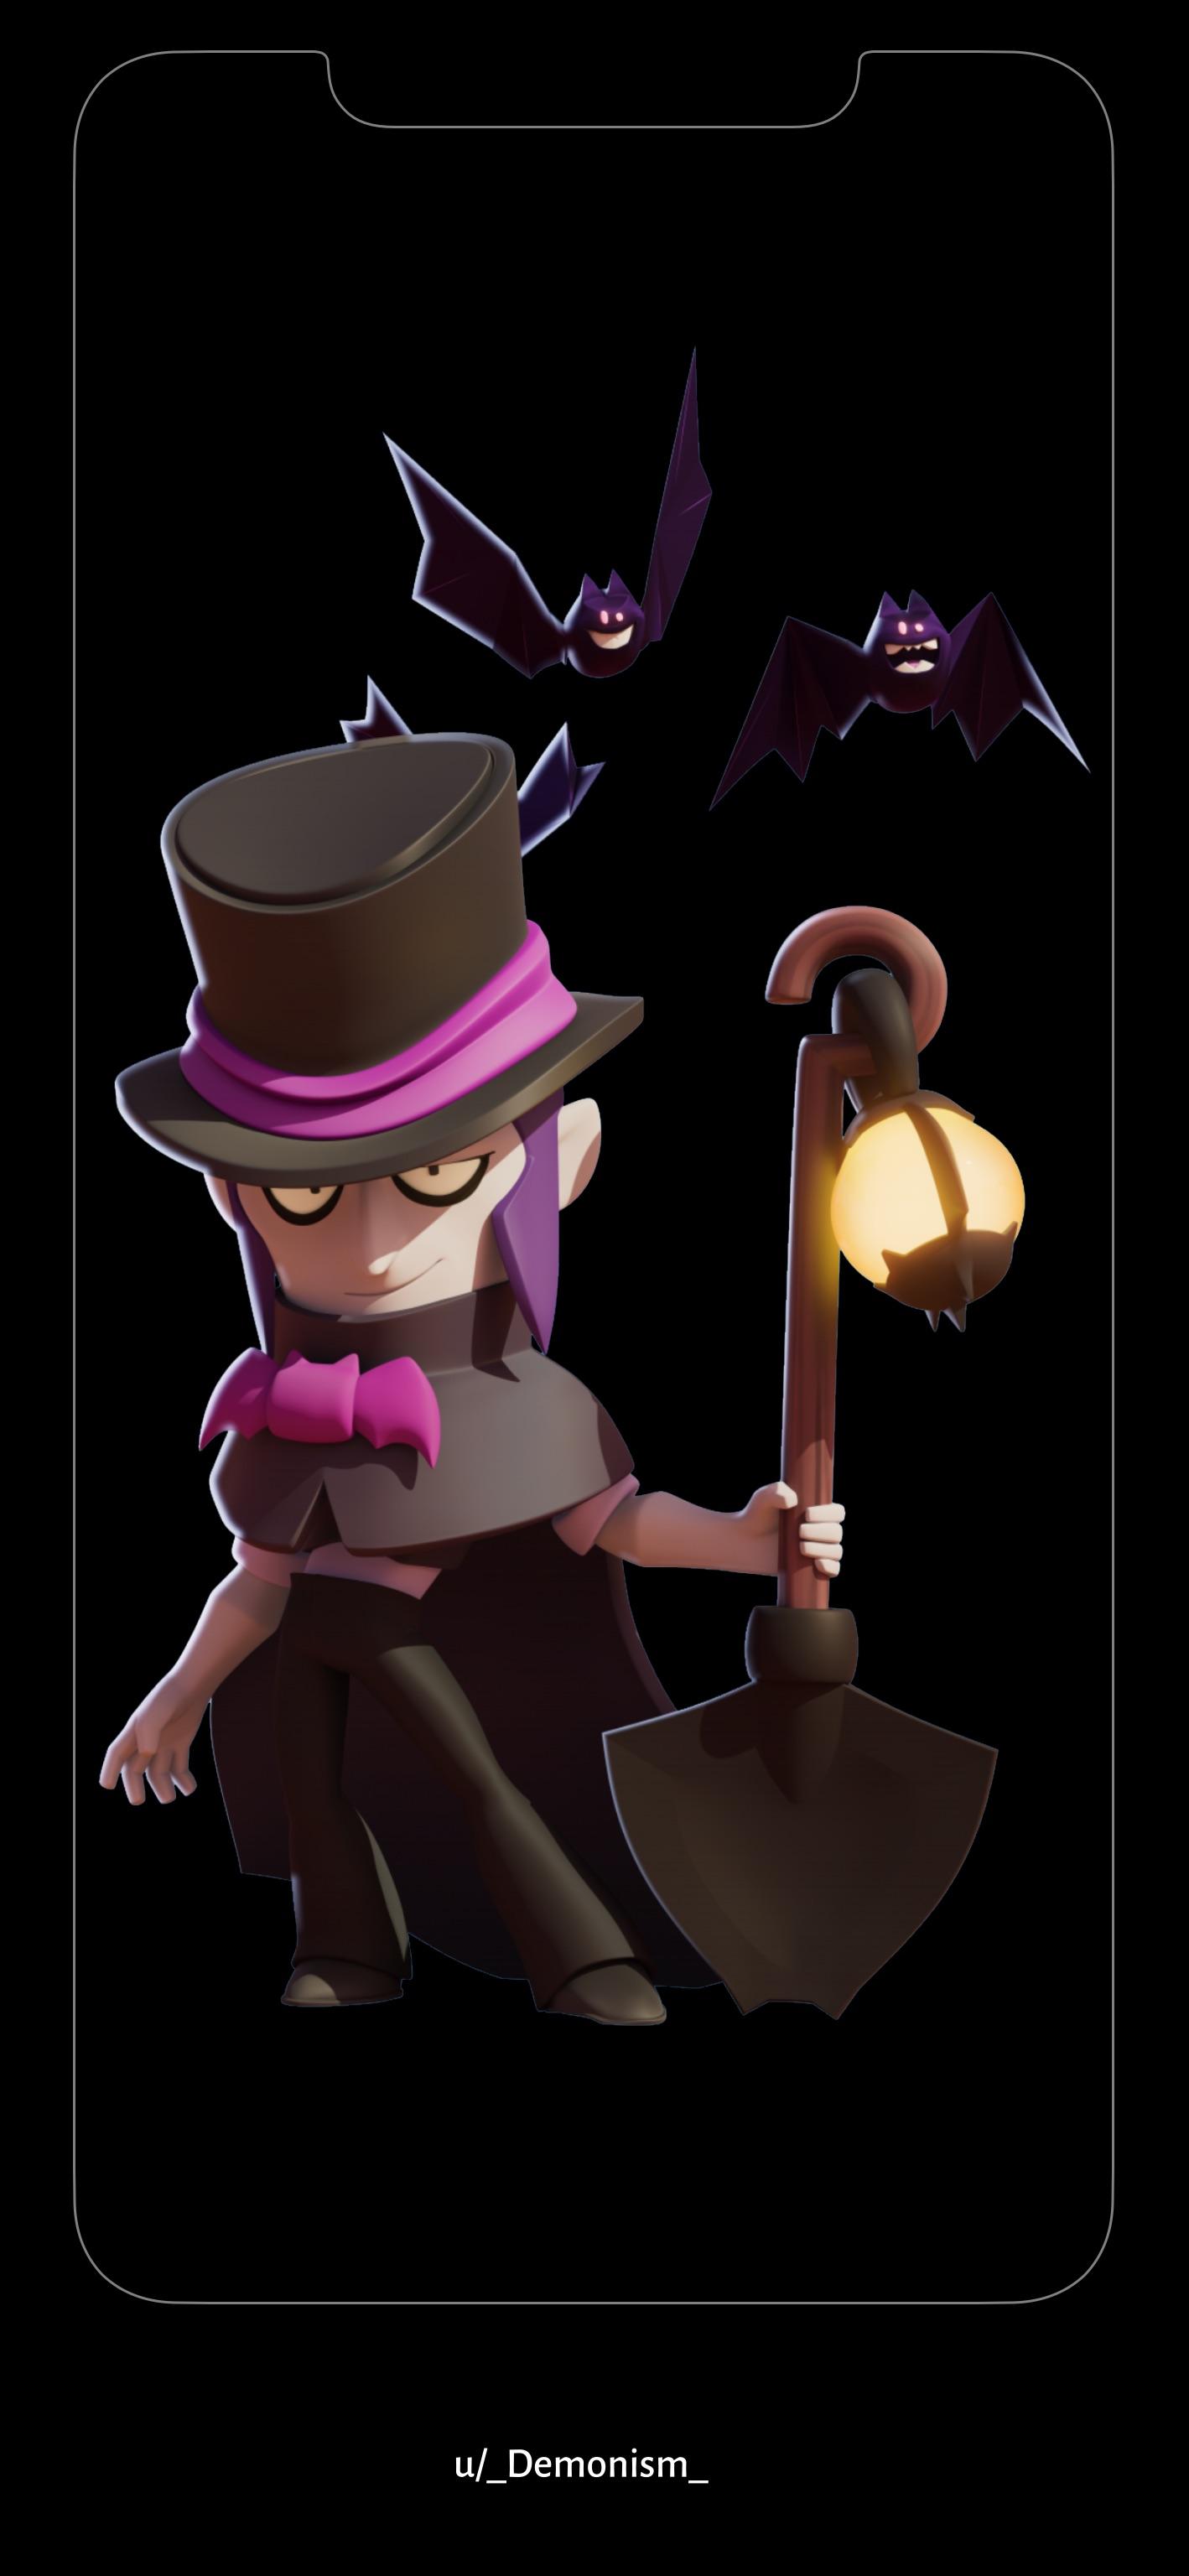 Mortis wallpaper for iPhone XS Max